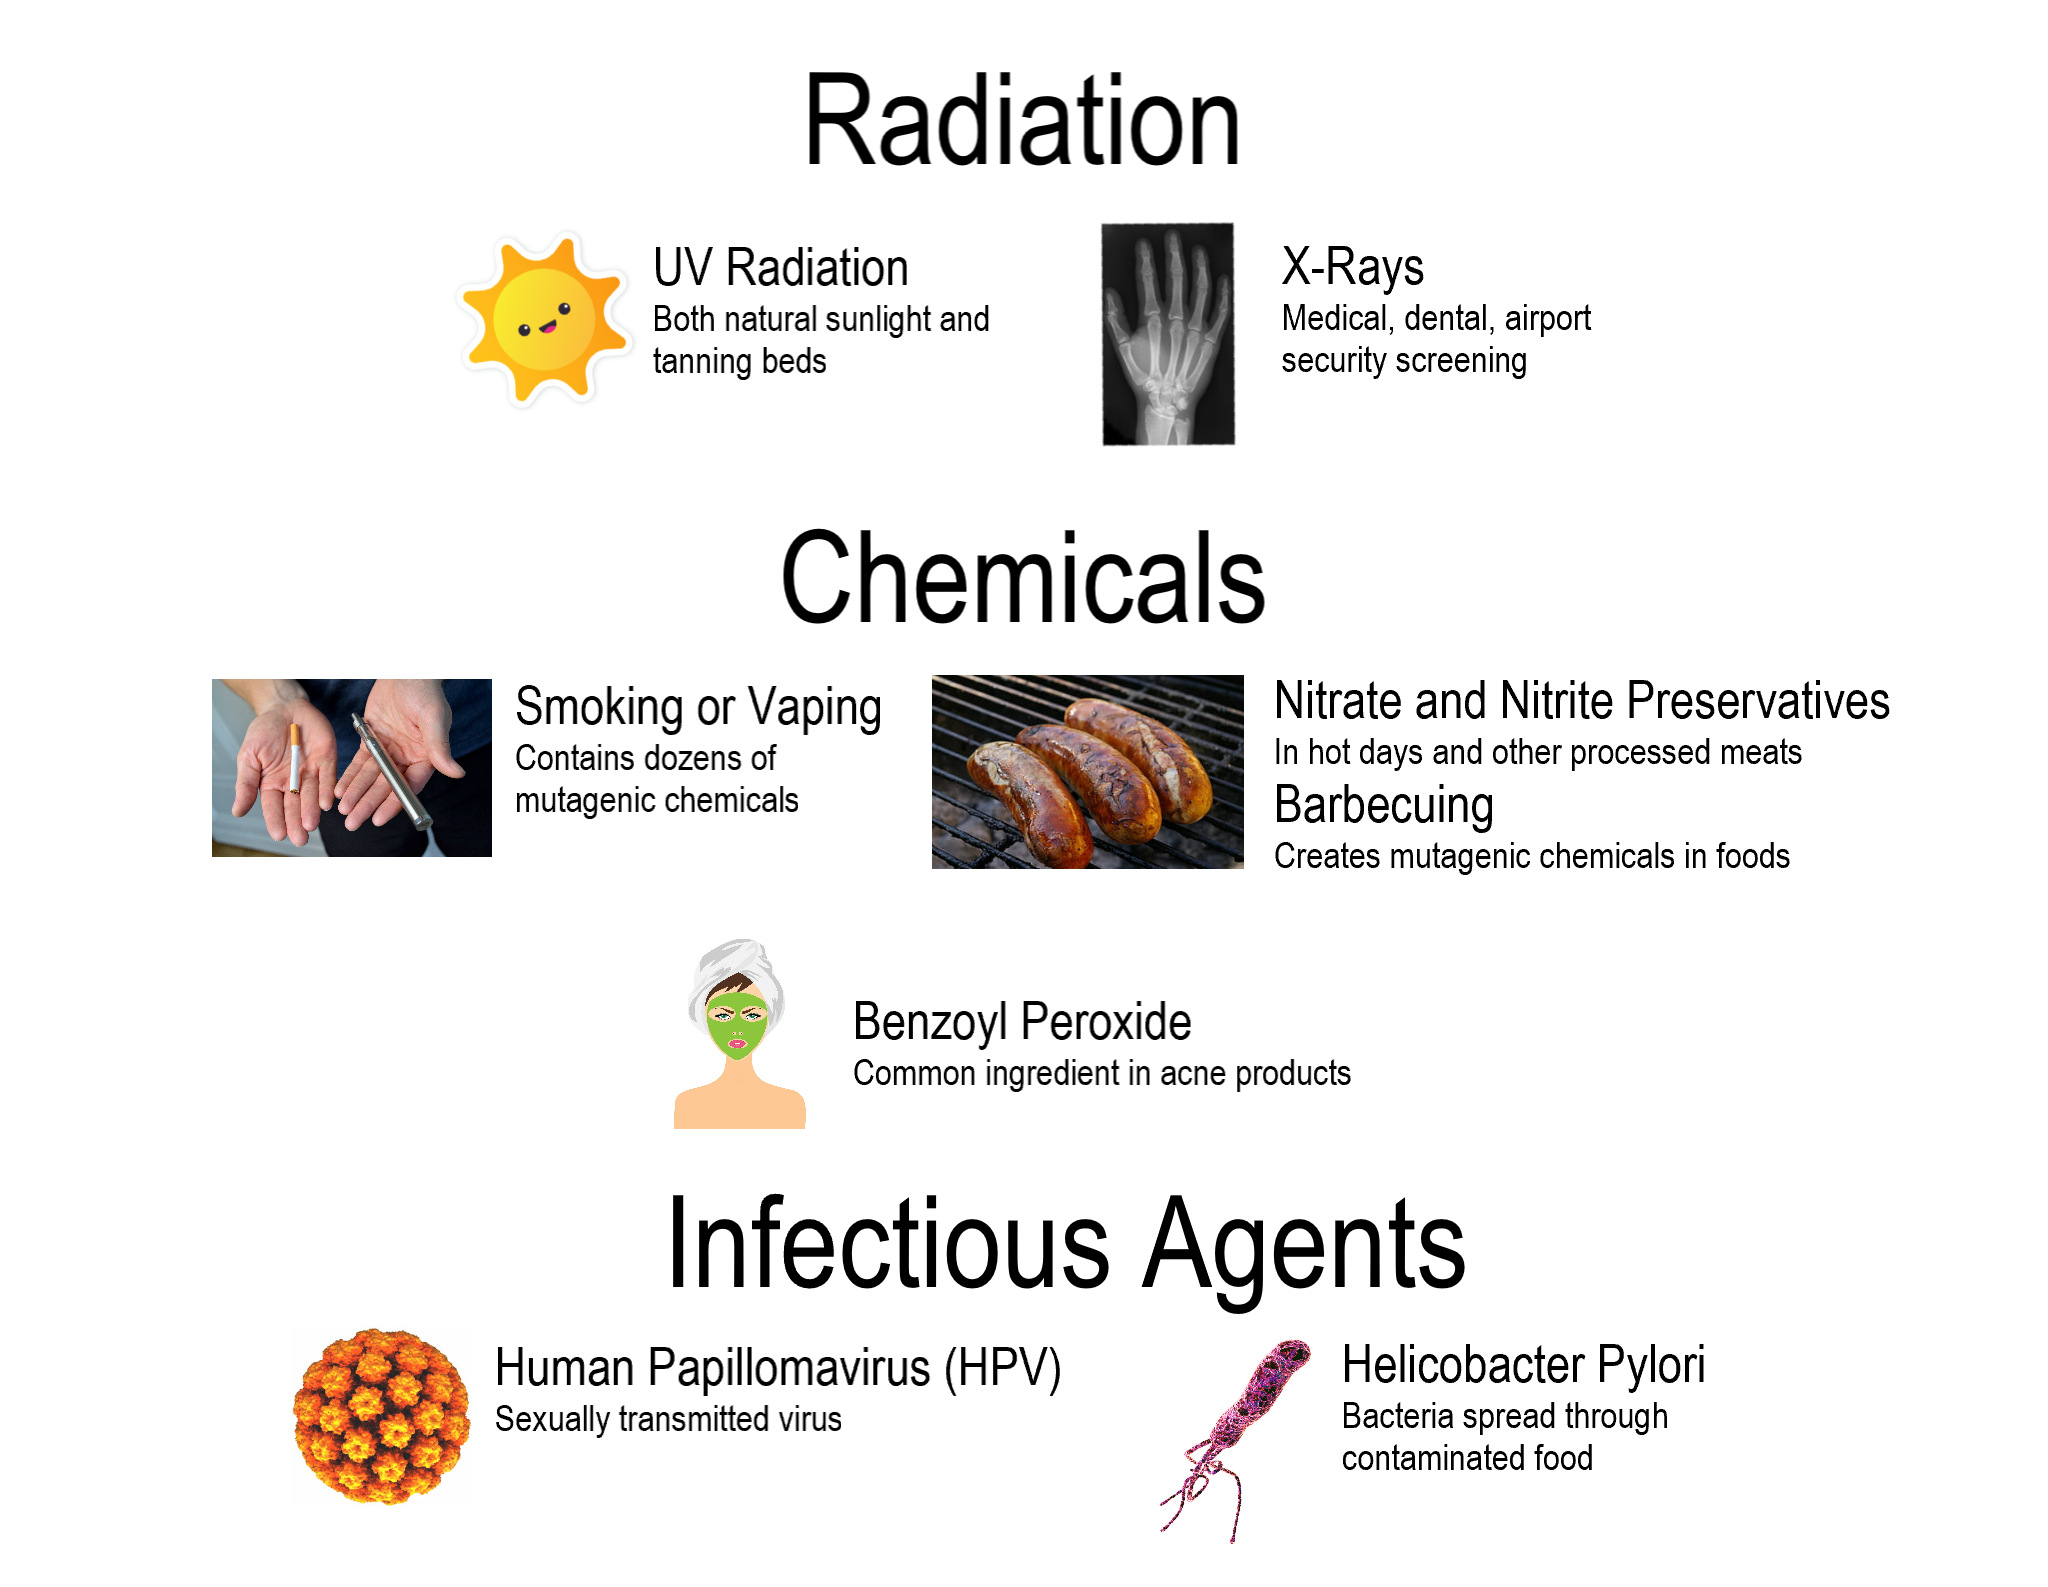 Examples of Radiation, chemicals and infectious agents: An mage of a sun icon and hand x-ray for UV and x-ray radiation; a picture of hands holding a cigarrette and a vape, 3 smokies on a grill (nitrates/ nitrites and mutagenic BBQ chemicals) and a stylized image of a woman in a green acne face mask with benzoyl peroxide to represent chemicals. To represent infectious agents: an orange spherical virus as human papillomavirus (HPV) and a purple spirilla bacterium with flagella for Helicobacter Pylori - a bacteria spread through contaminated food.